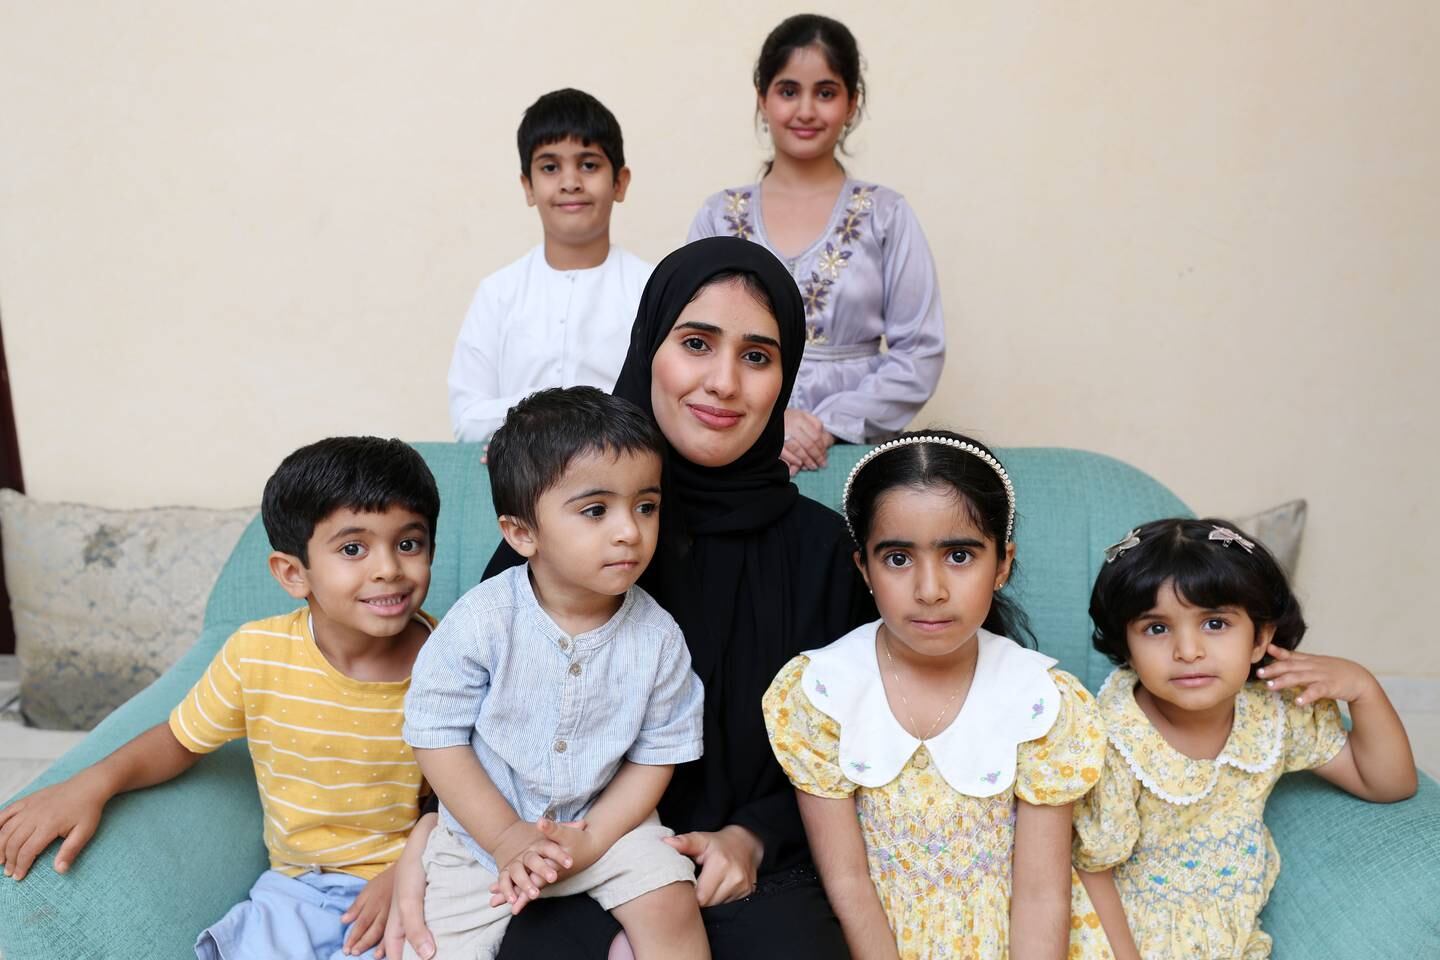 Mozoon Khalifa Al Ketbi, with her four nieces and nephews and two siblings. Chris Whiteoak / The National